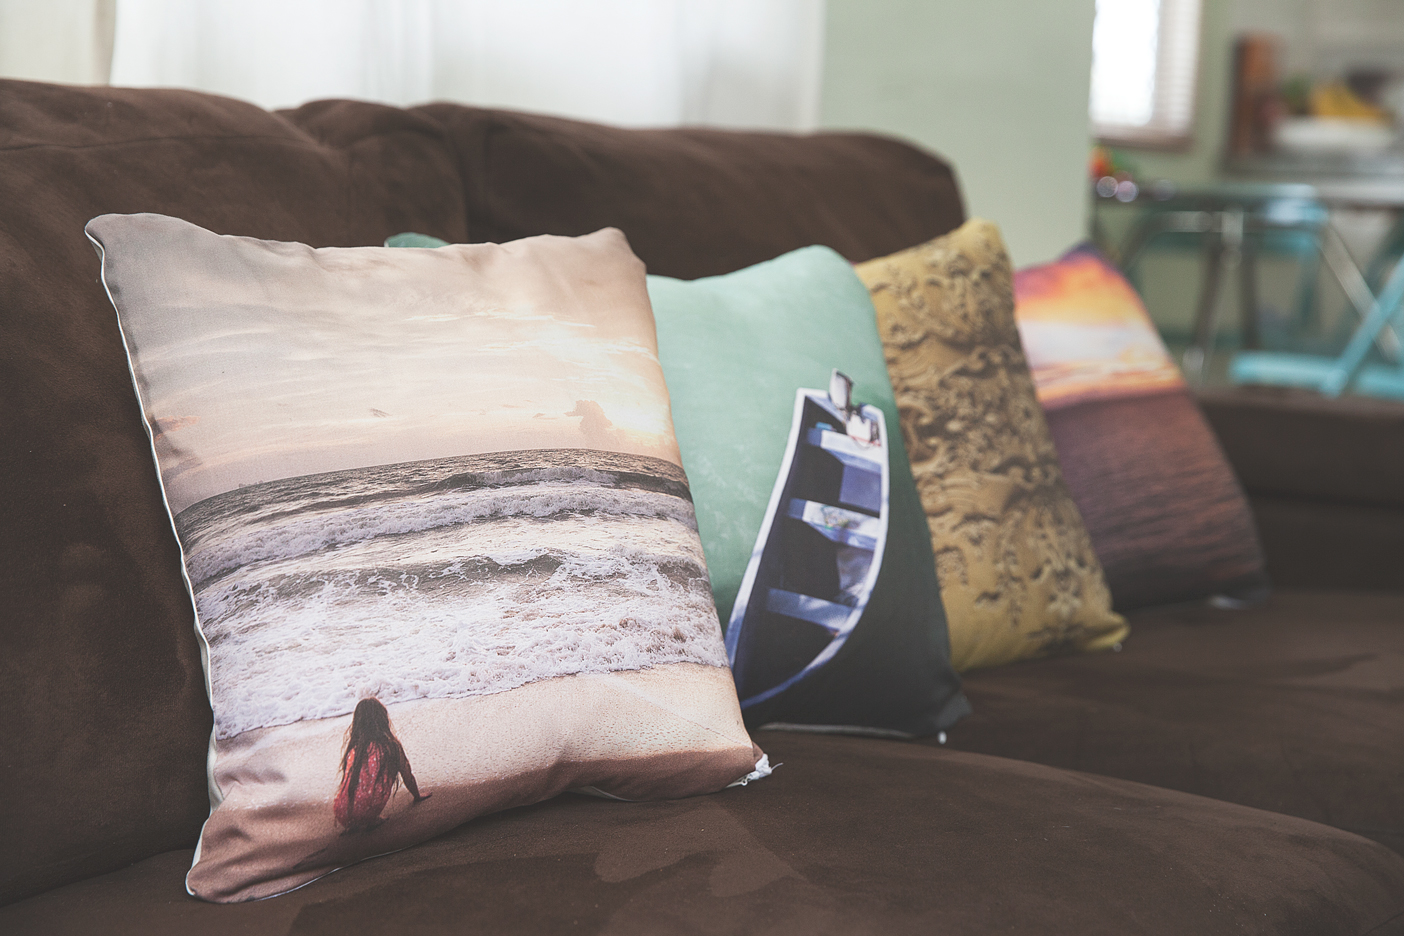 'Oh, the Places You'll Go' #cushion series by The #Cumulus Factory. Photo by Kristina Childs. See more on the RSD Blog.